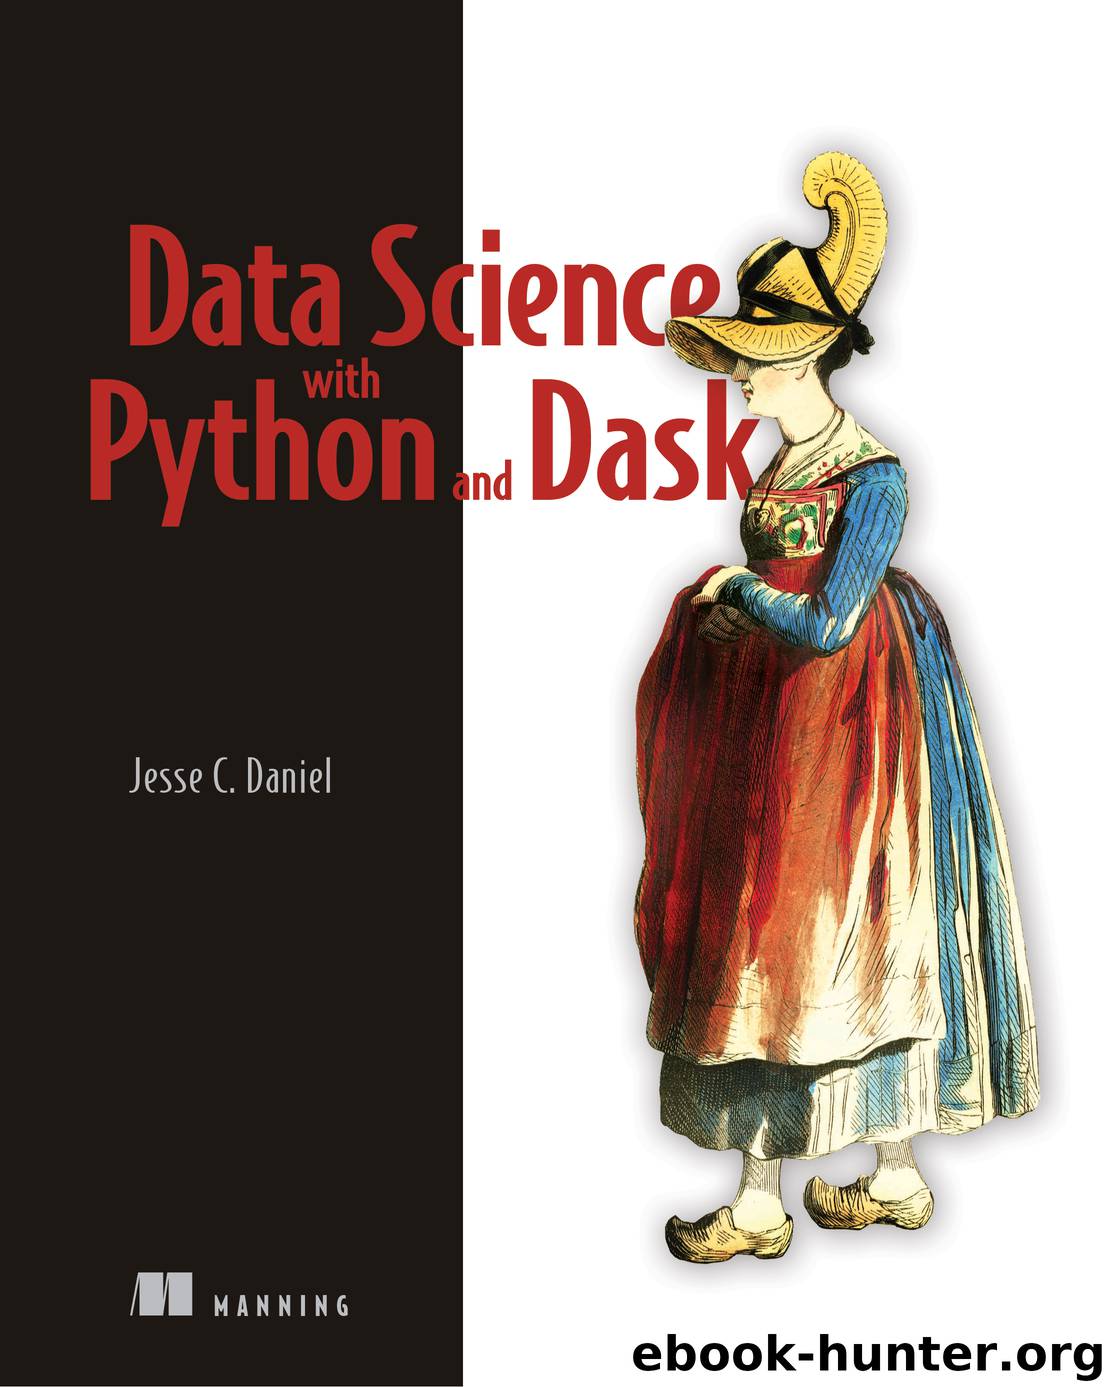 Data Science with Python and Dask by Jesse Daniel